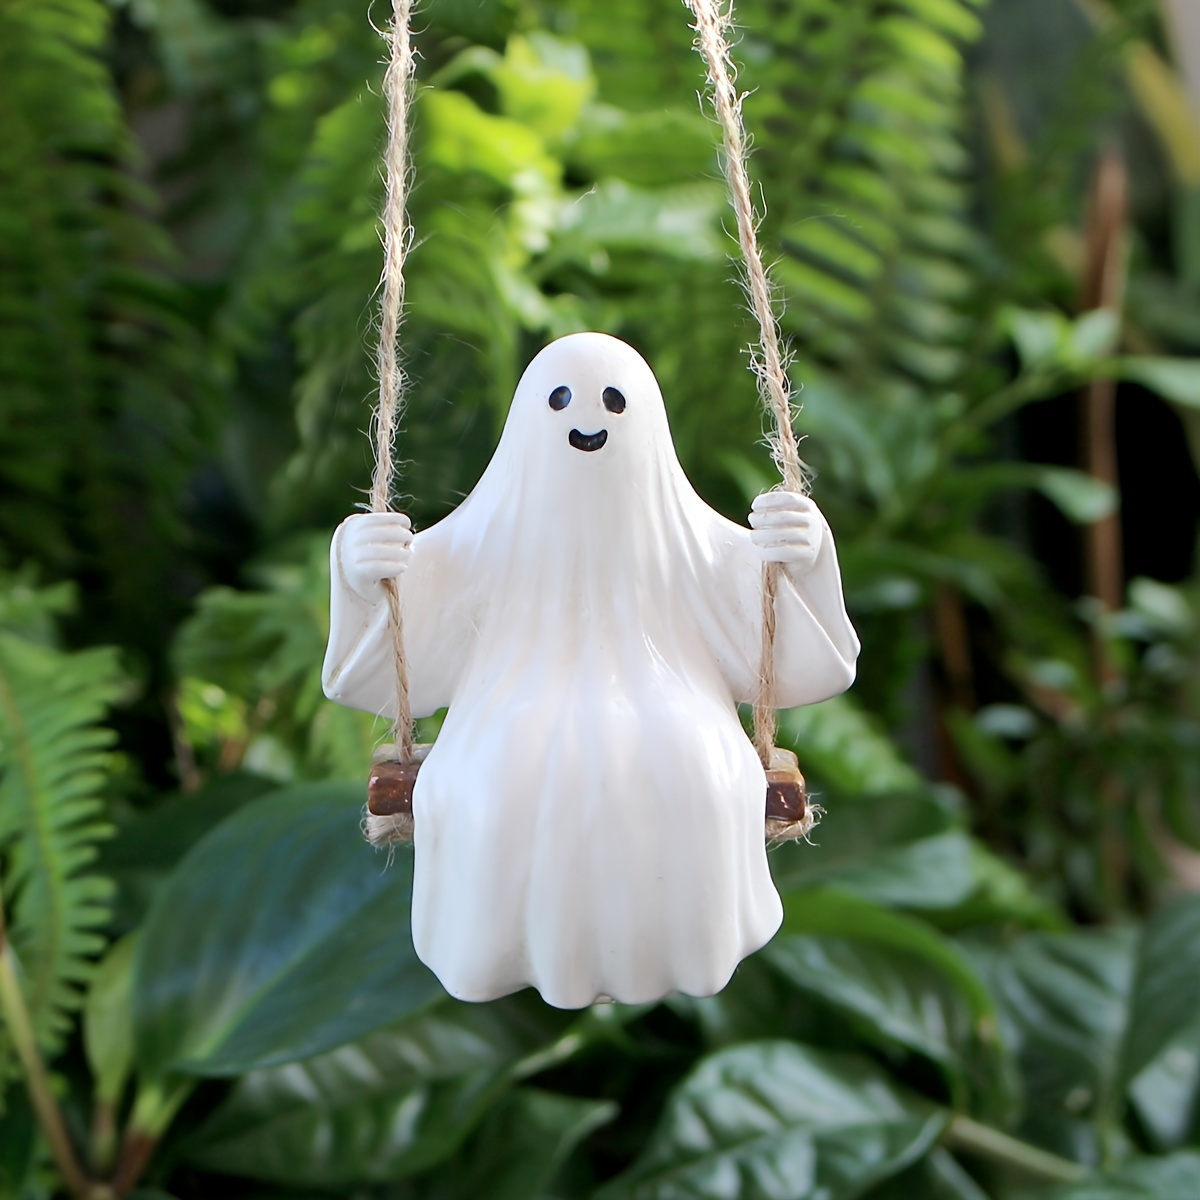 

Spooky Swing Ghost Resin Ornament - Perfect For Halloween, Garden & Home Decor | No Power Needed